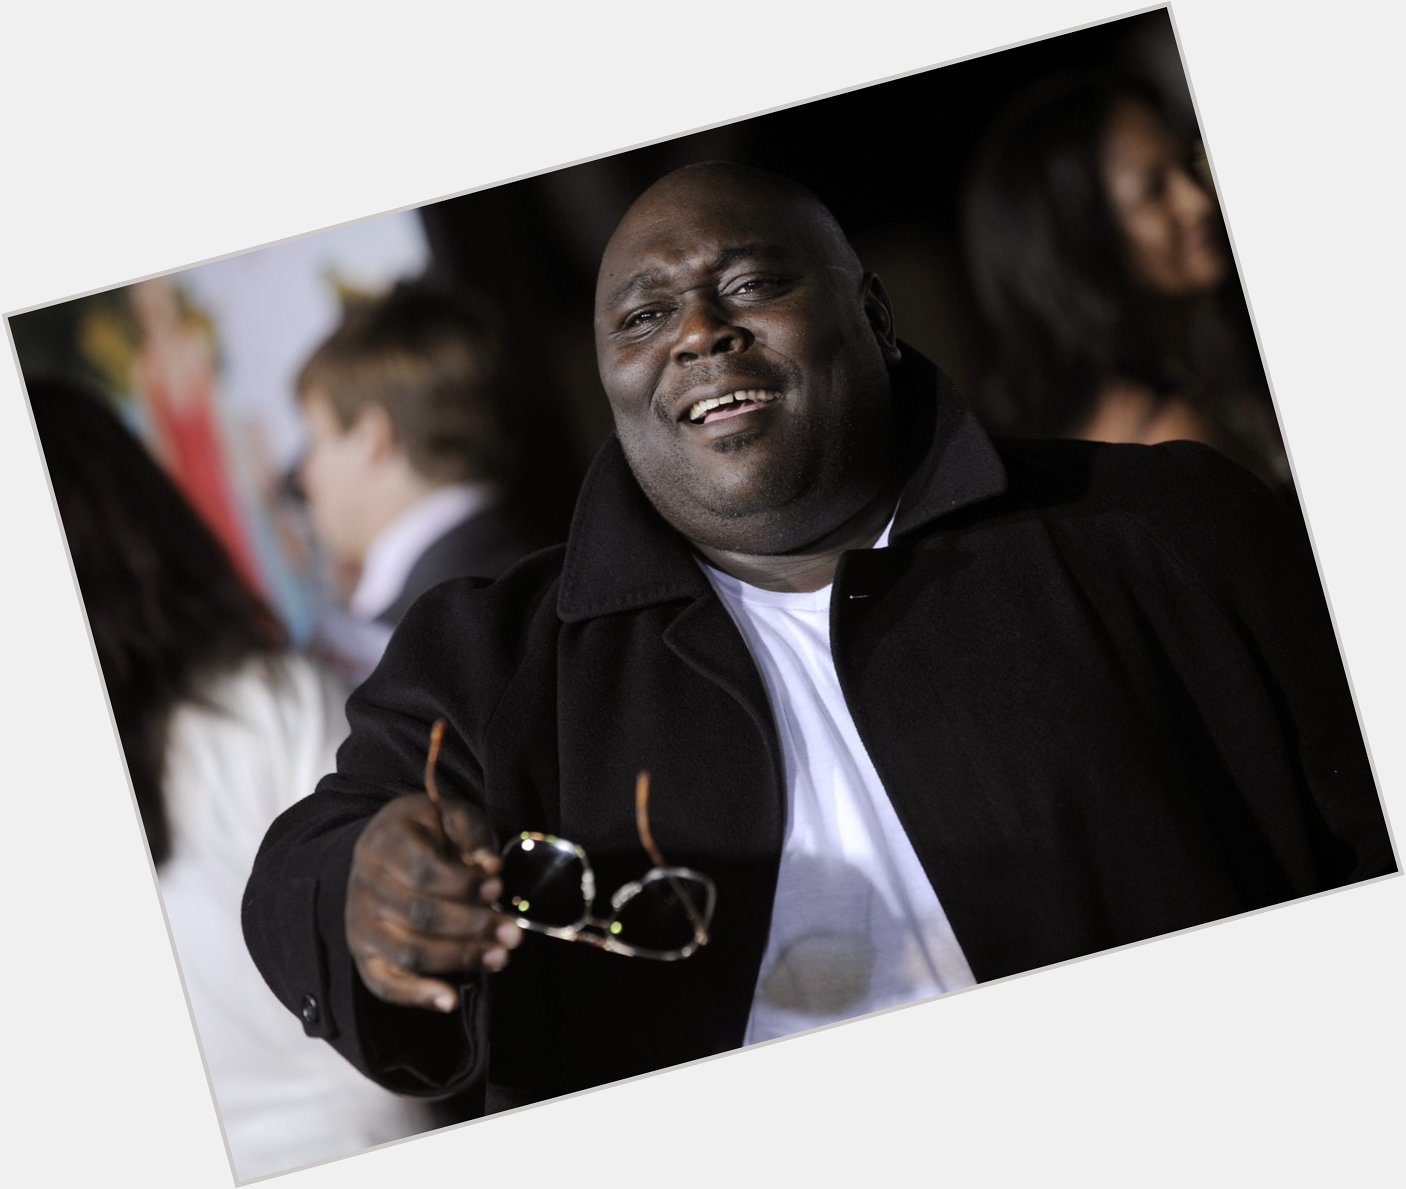 Happy 49th birthday to actor Faizon Love! We still love and laugh at Big Worm from the Friday movie. 